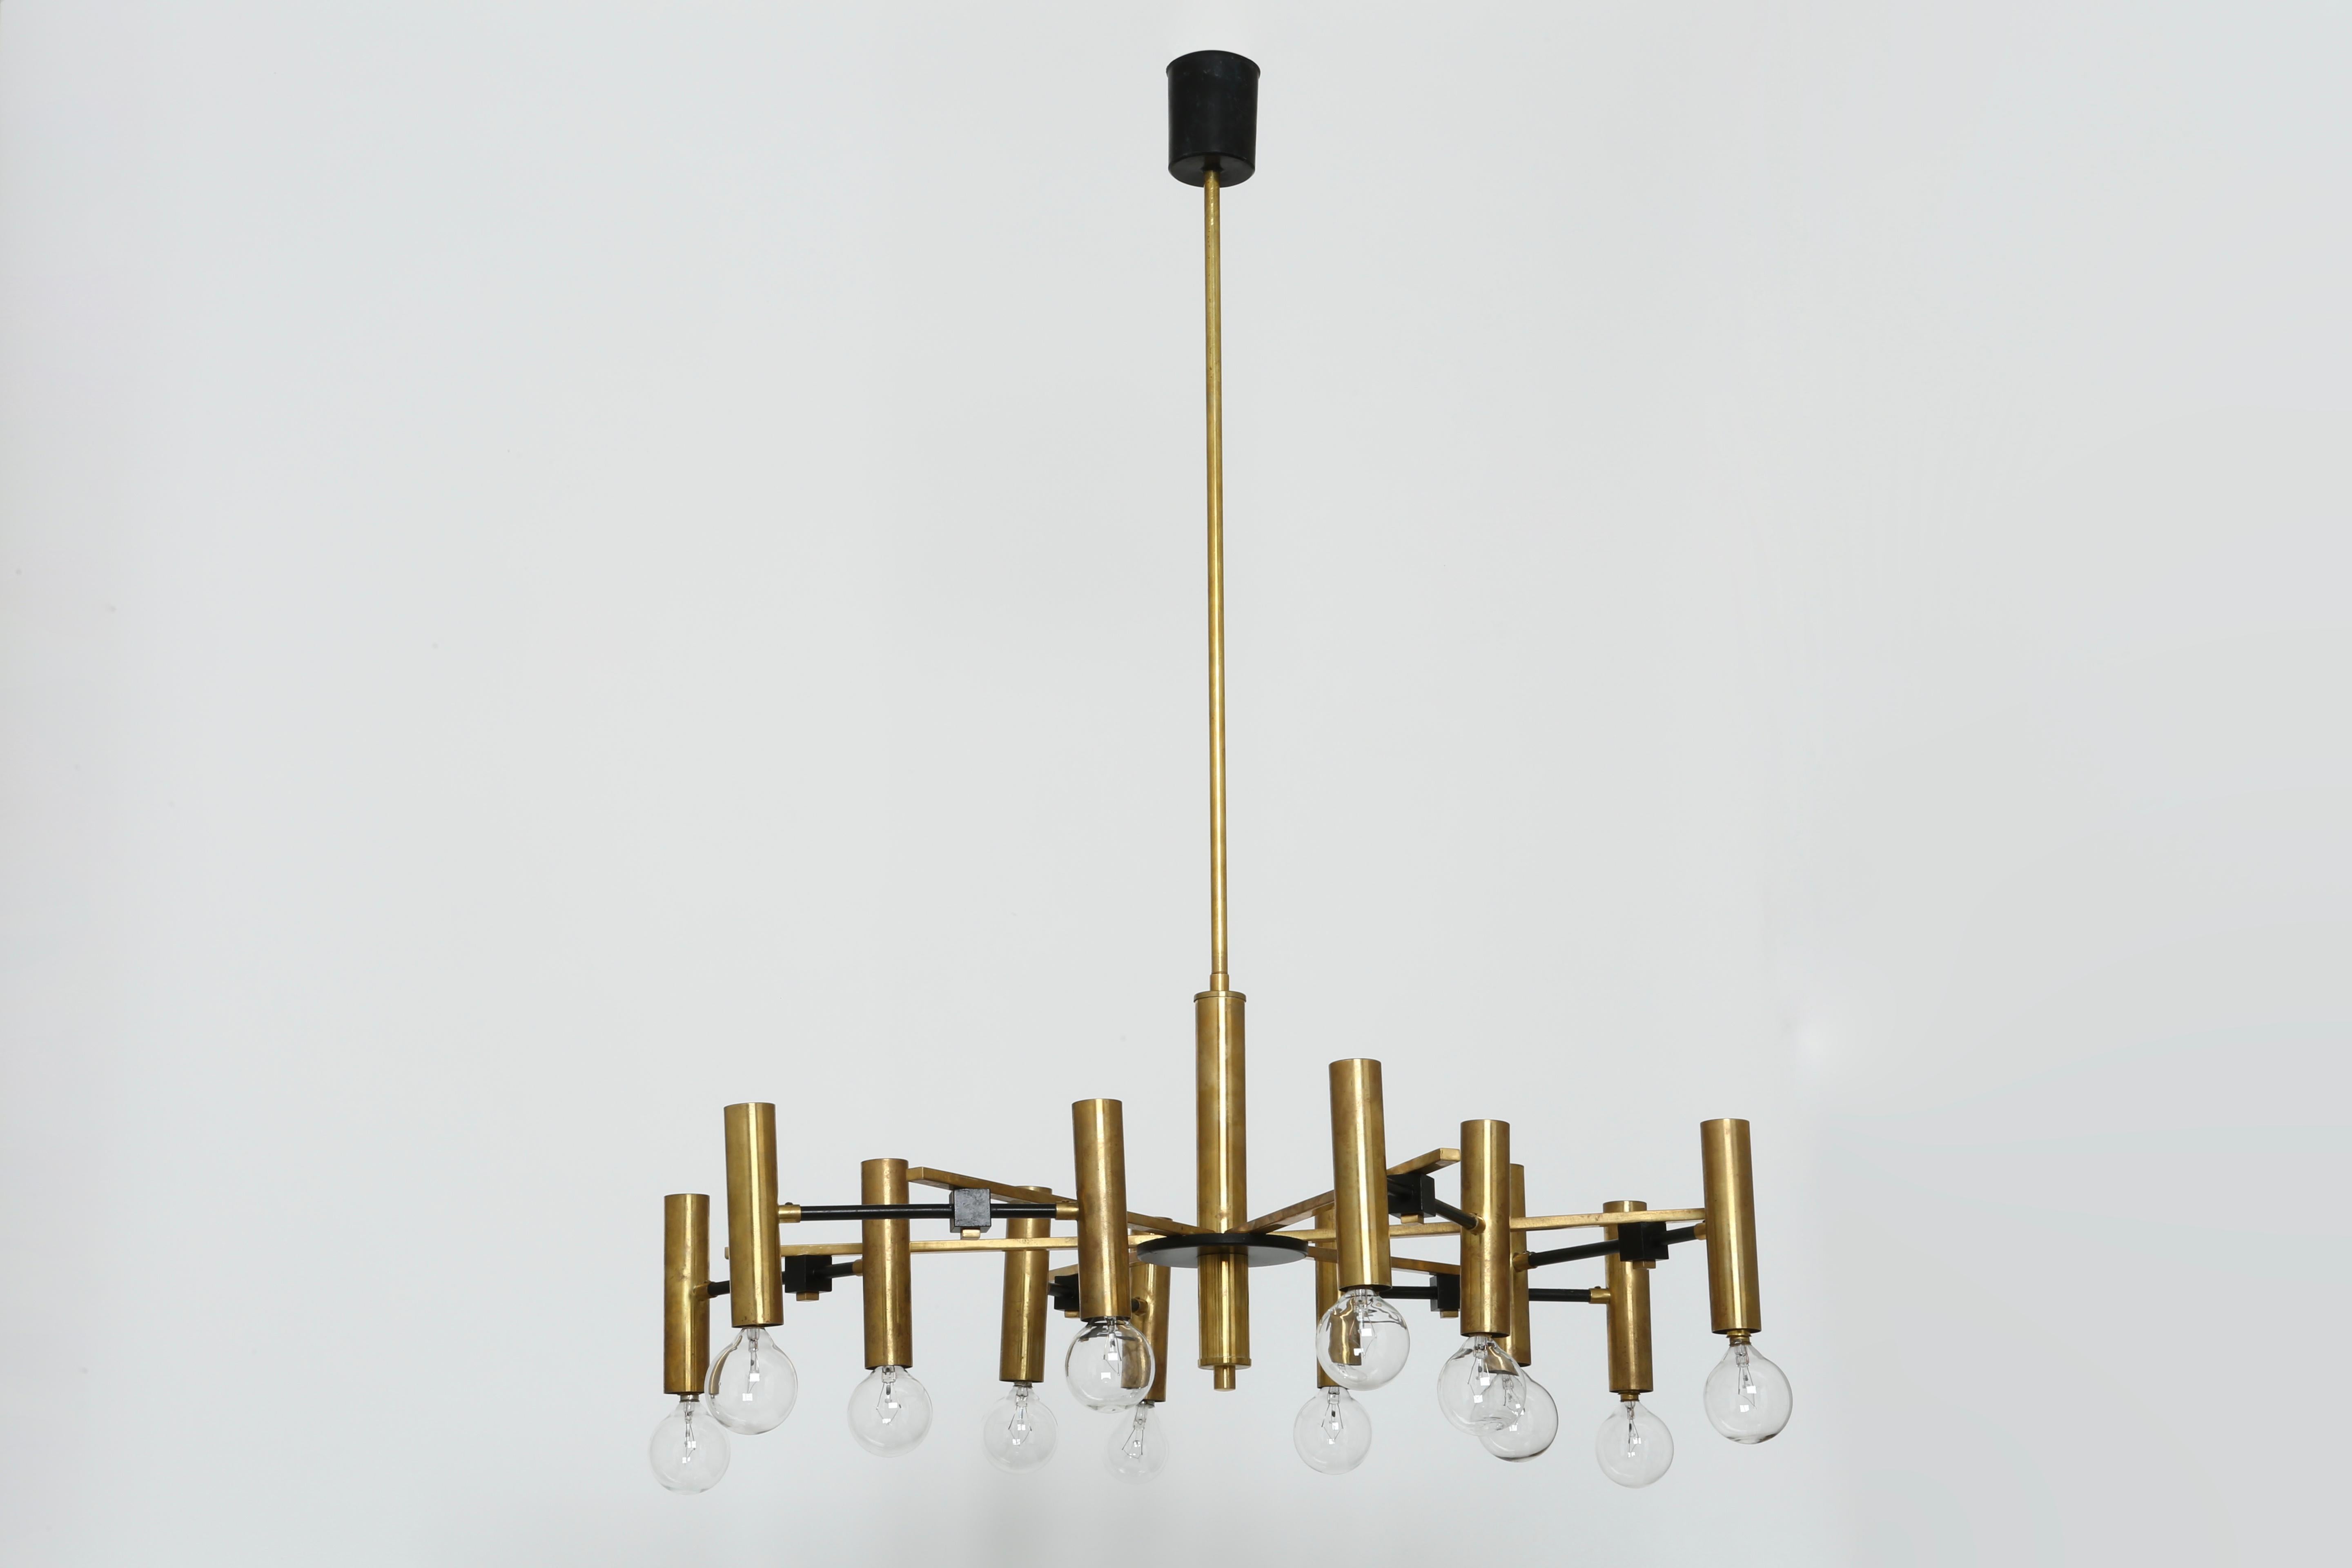 Gino Sarfatti chandelier for Arteluce.
Made in Italy in 1960s.
Patinated brass. 
12 Candelabra sockets.
Complimentary US rewiring upon request.
Height adjustable. Ceiling rod can be shortened.

We take pride in bringing vintage fixtures to their